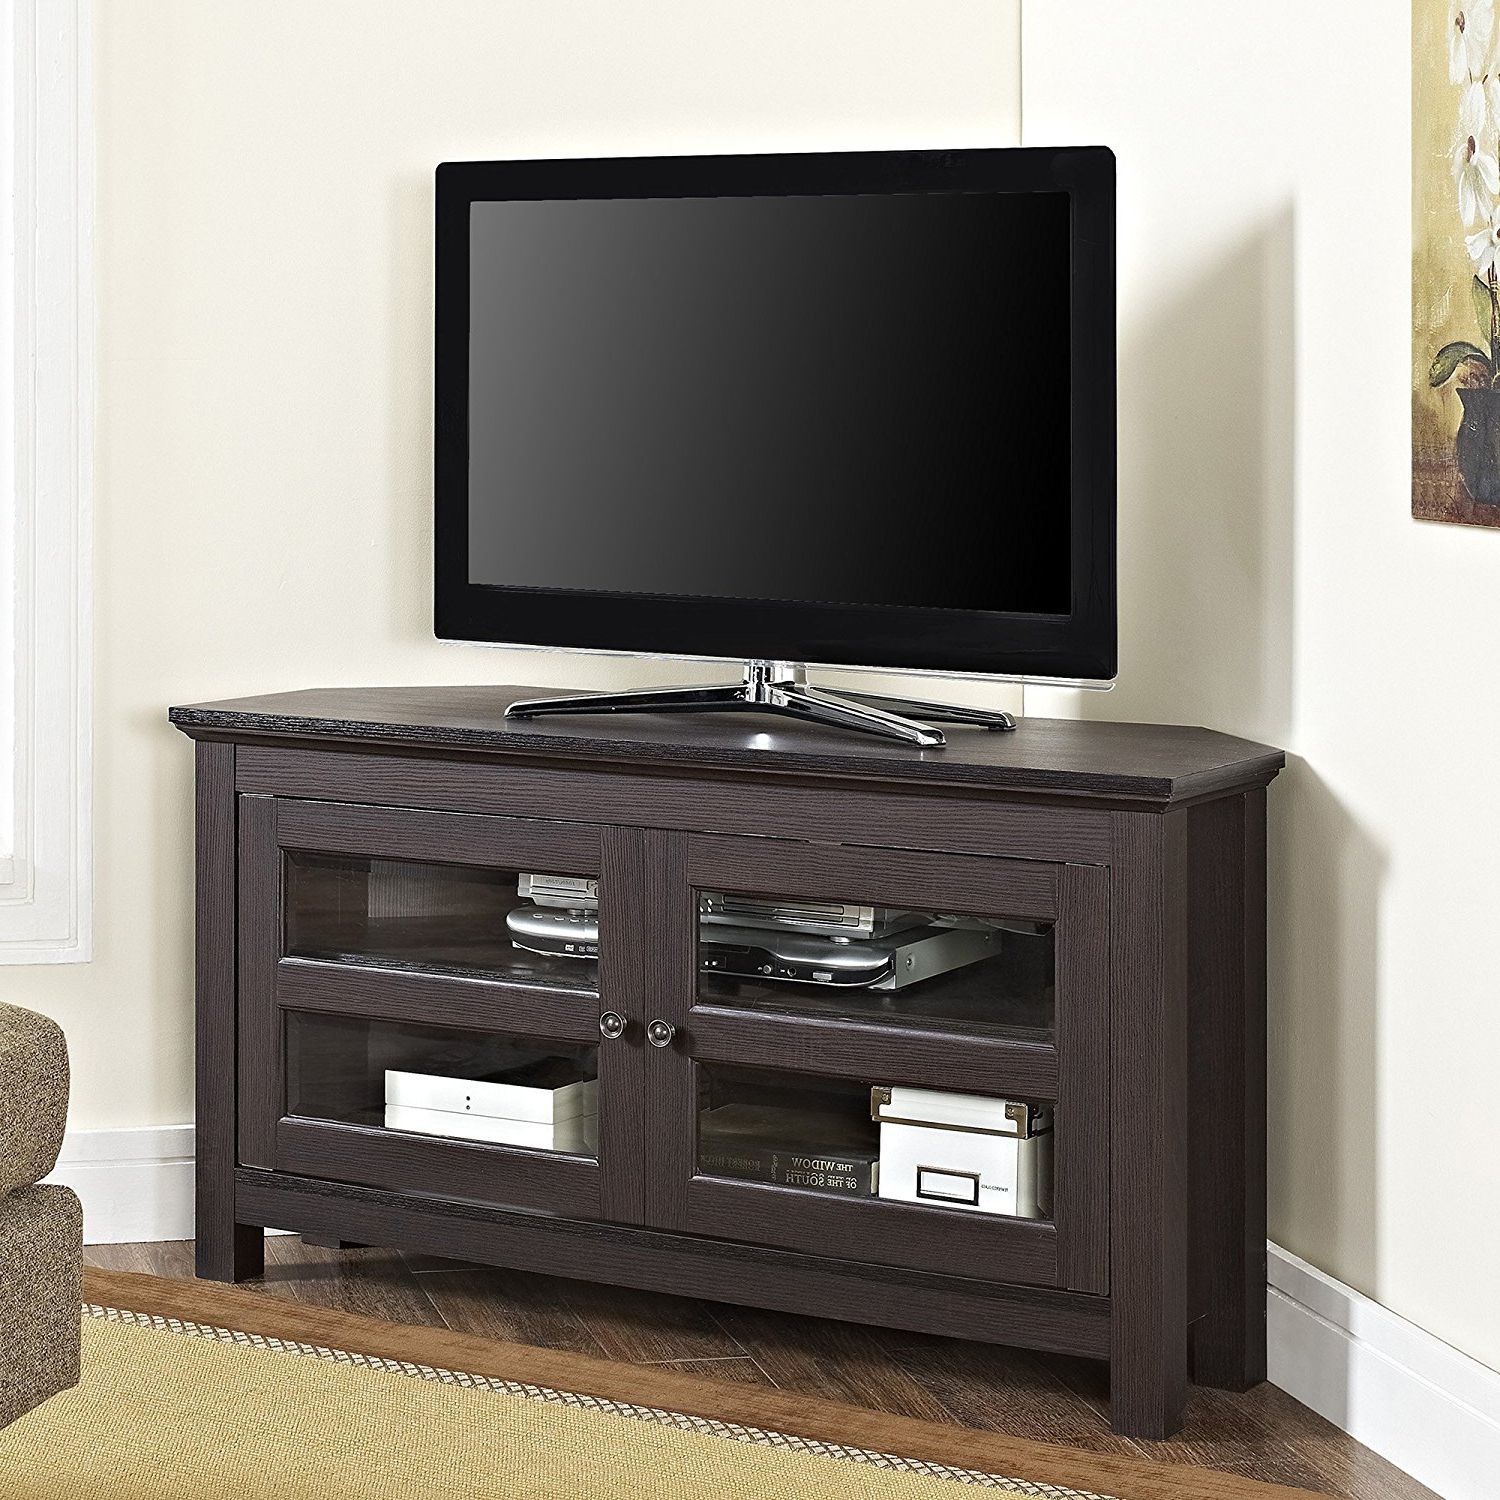 Top 10 Best Modern Tall Corner Tv Stands In 2019 Reviews – Paramatan Intended For Fashionable Cordoba Tv Stands (View 5 of 20)